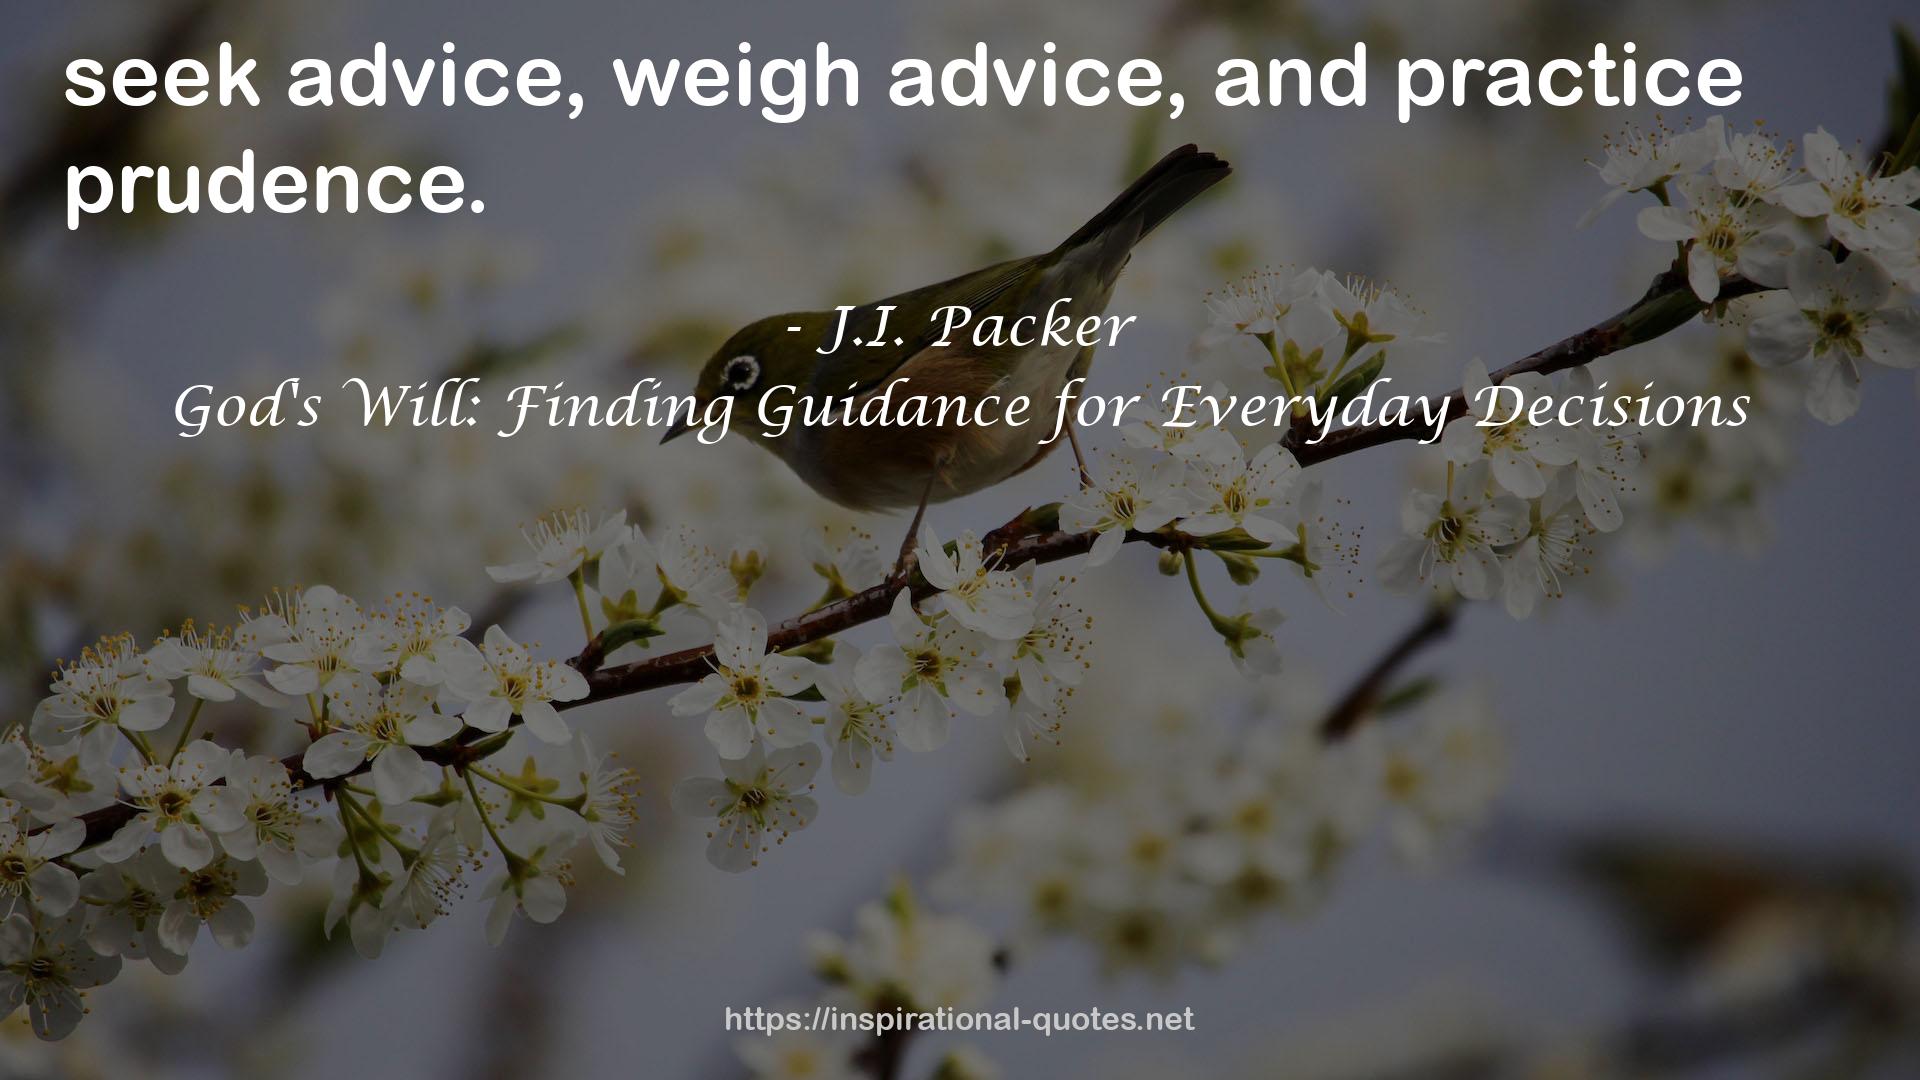 God's Will: Finding Guidance for Everyday Decisions QUOTES